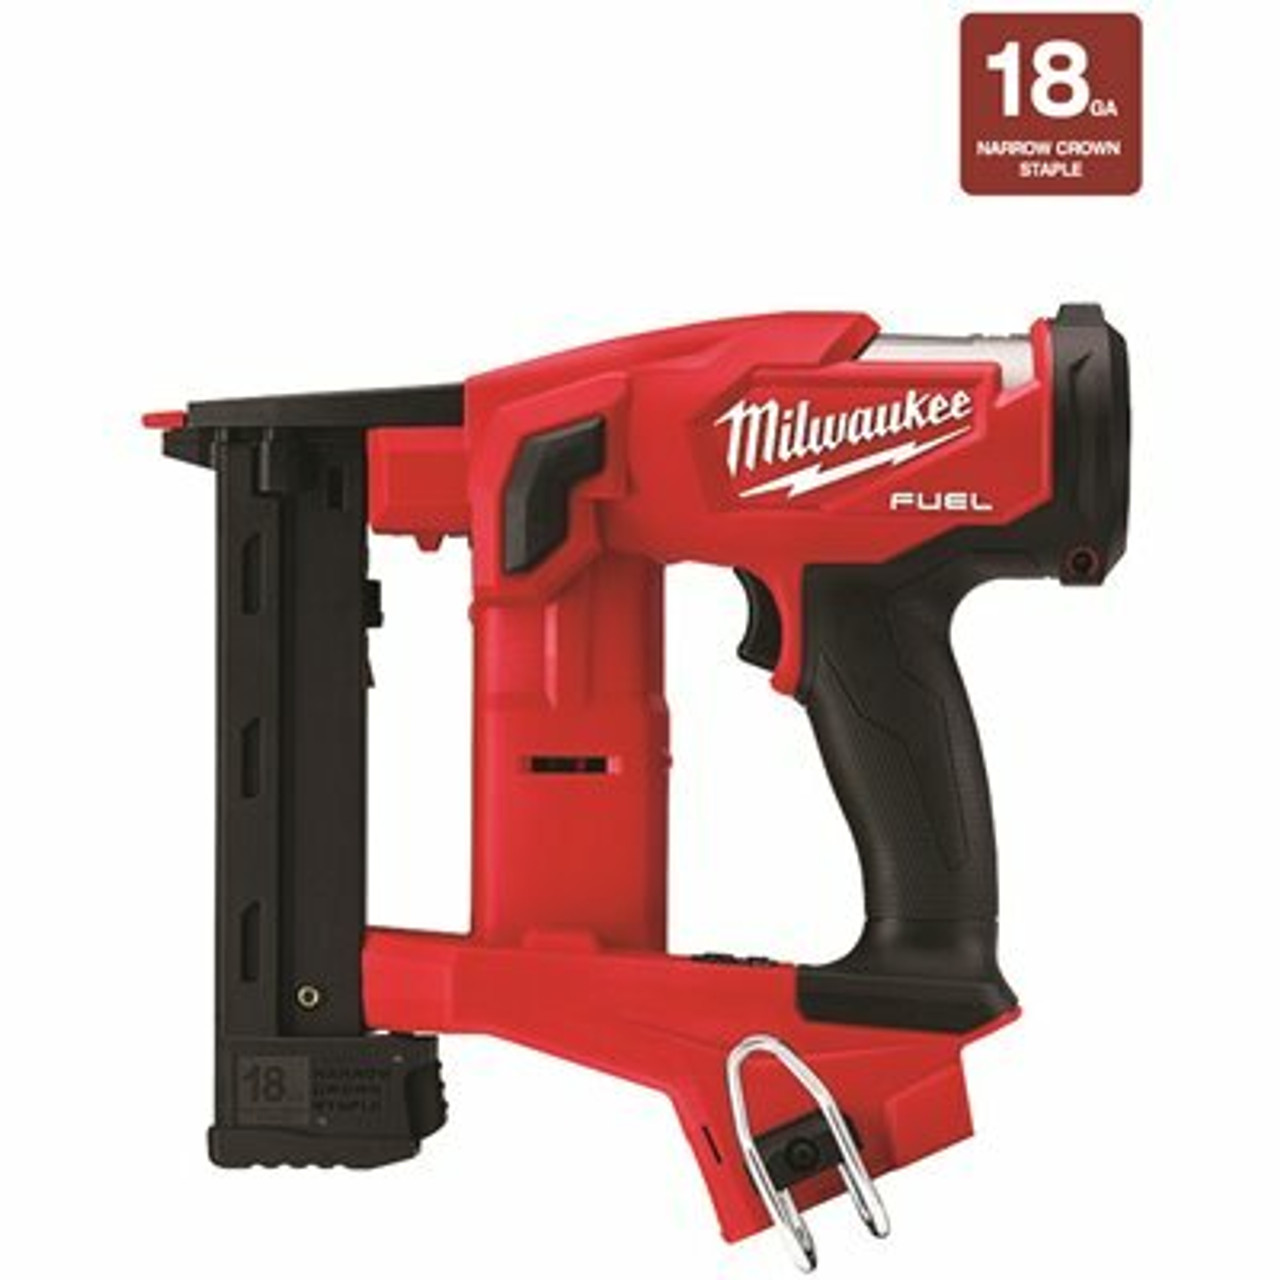 Milwaukee M18 Fuel 18-Volt Lithium-Ion Brushless Cordless 18-Gauge 1/4 In. Narrow Crown Stapler (Tool-Only)